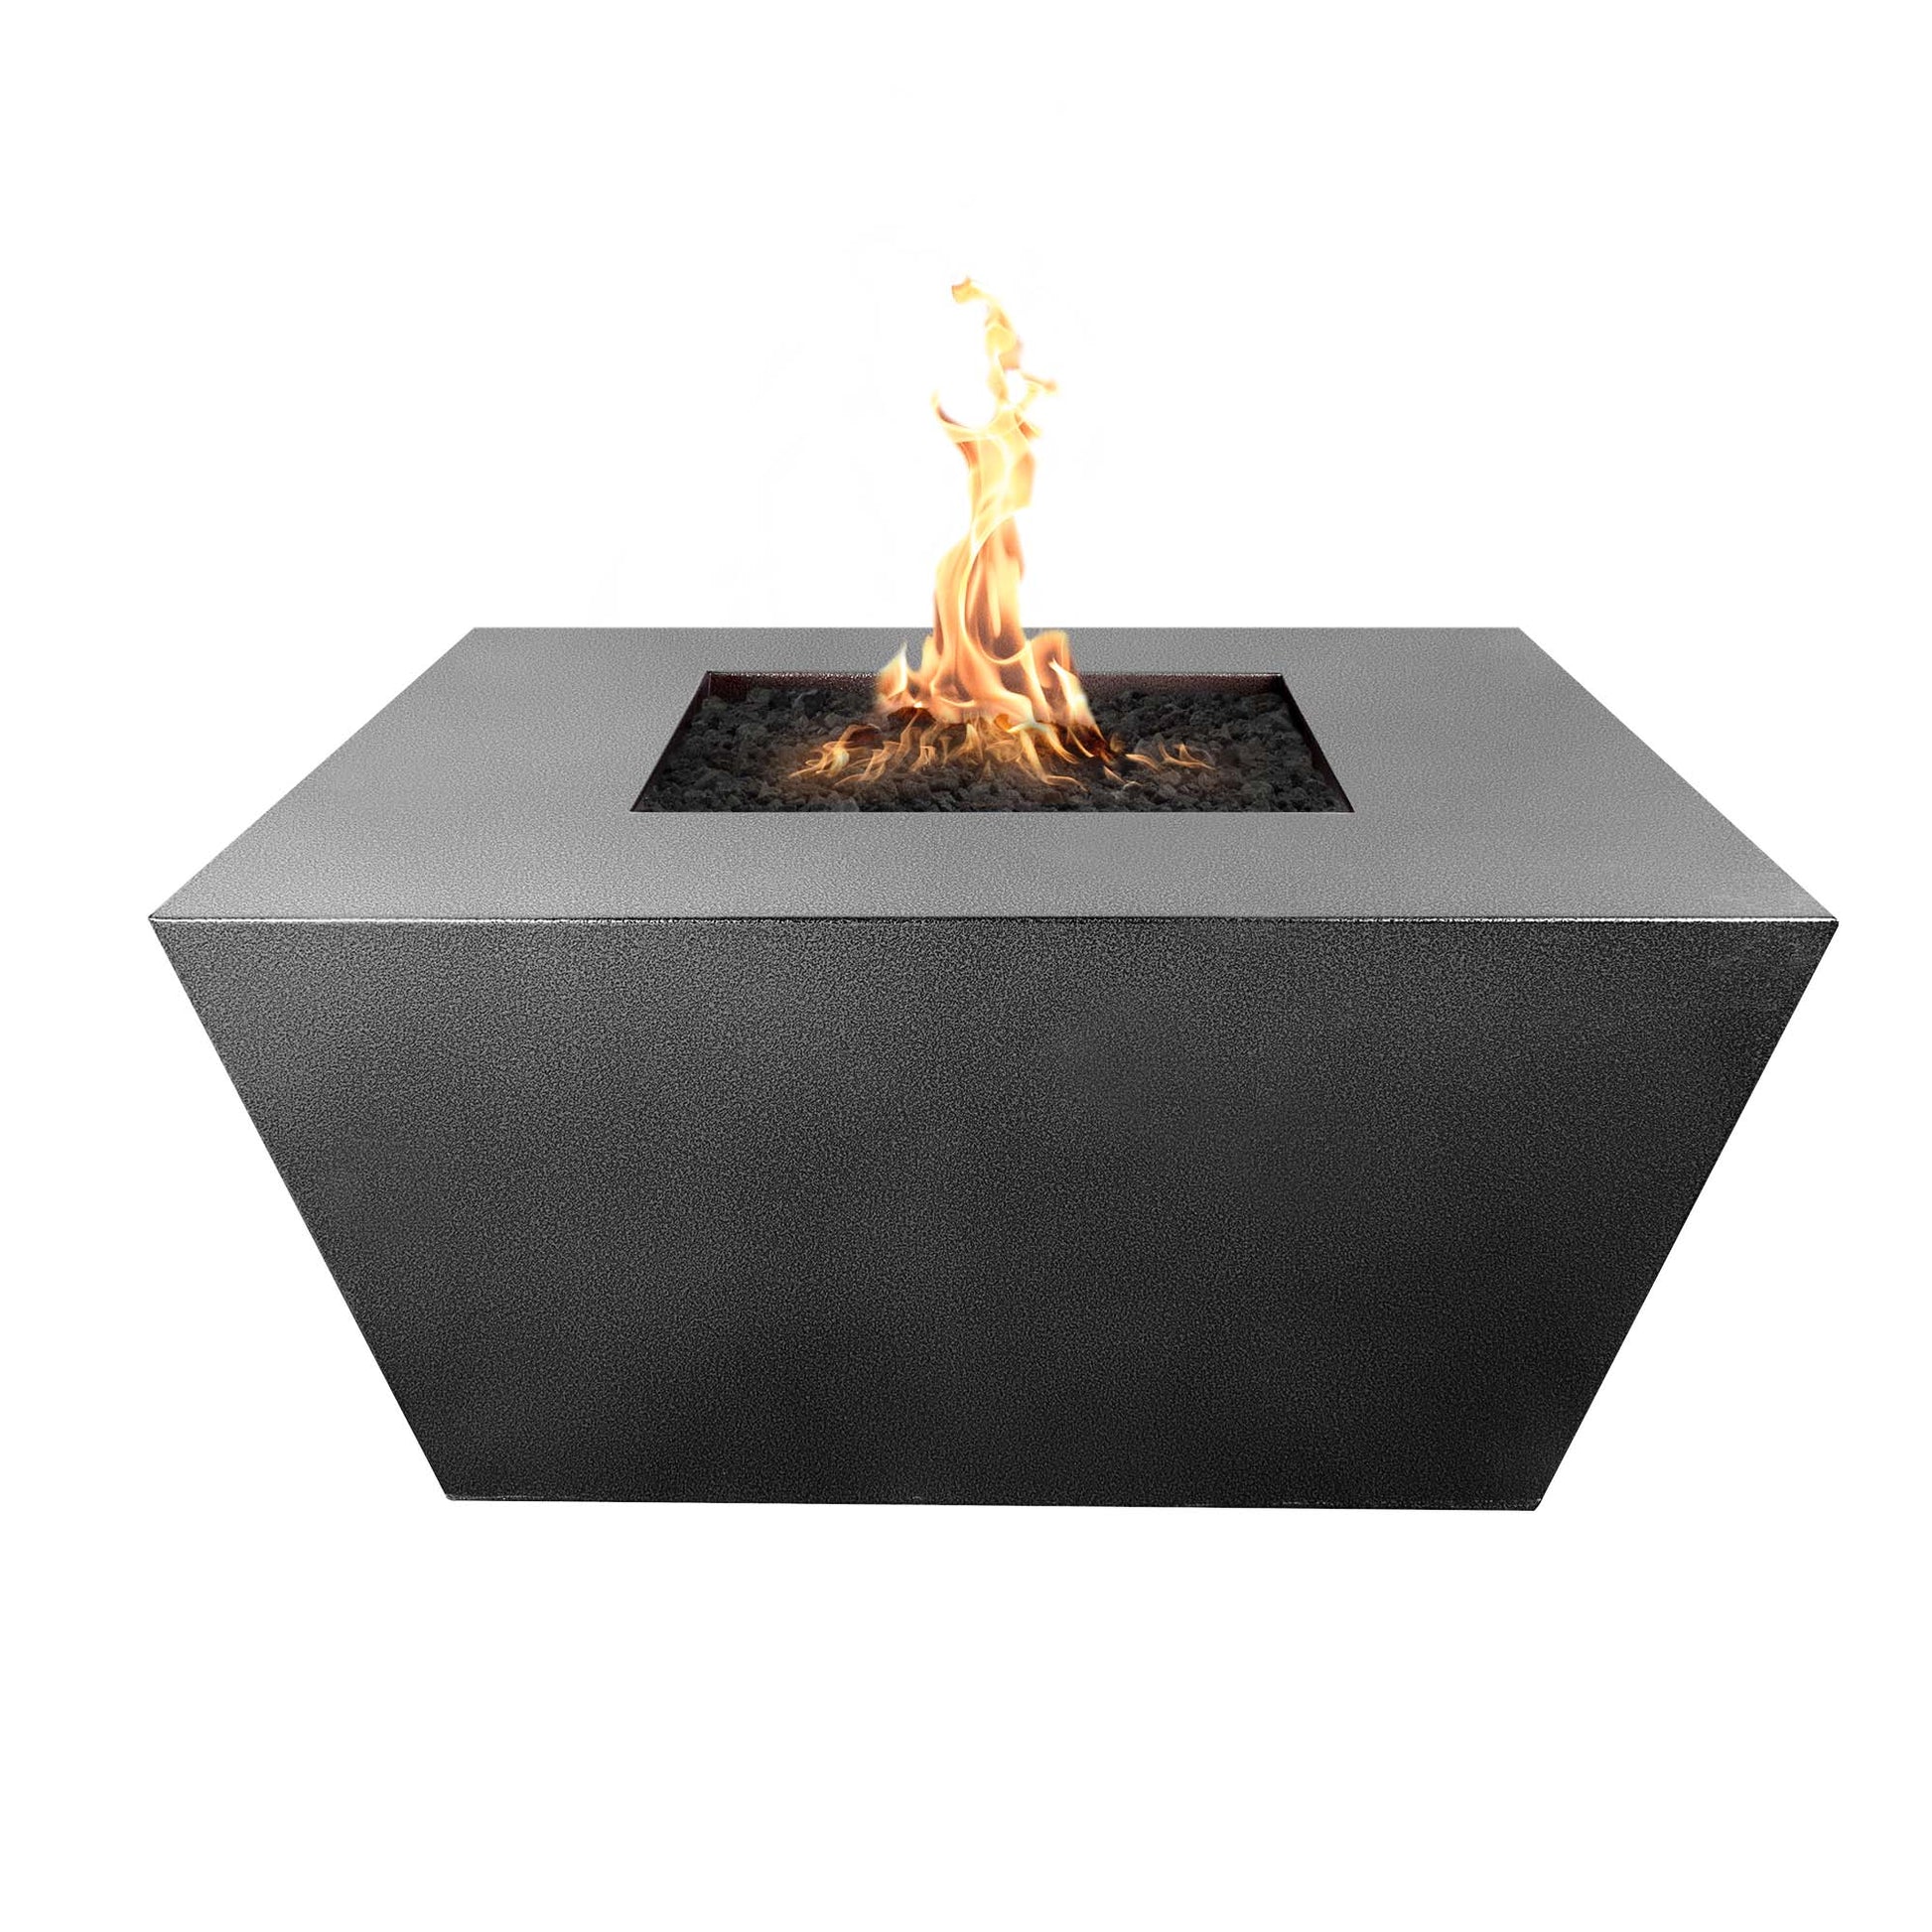 The Outdoor Plus Square Redan 36" Java Powder Coated Metal Liquid Propane Fire Pit with 110V Electronic Ignition